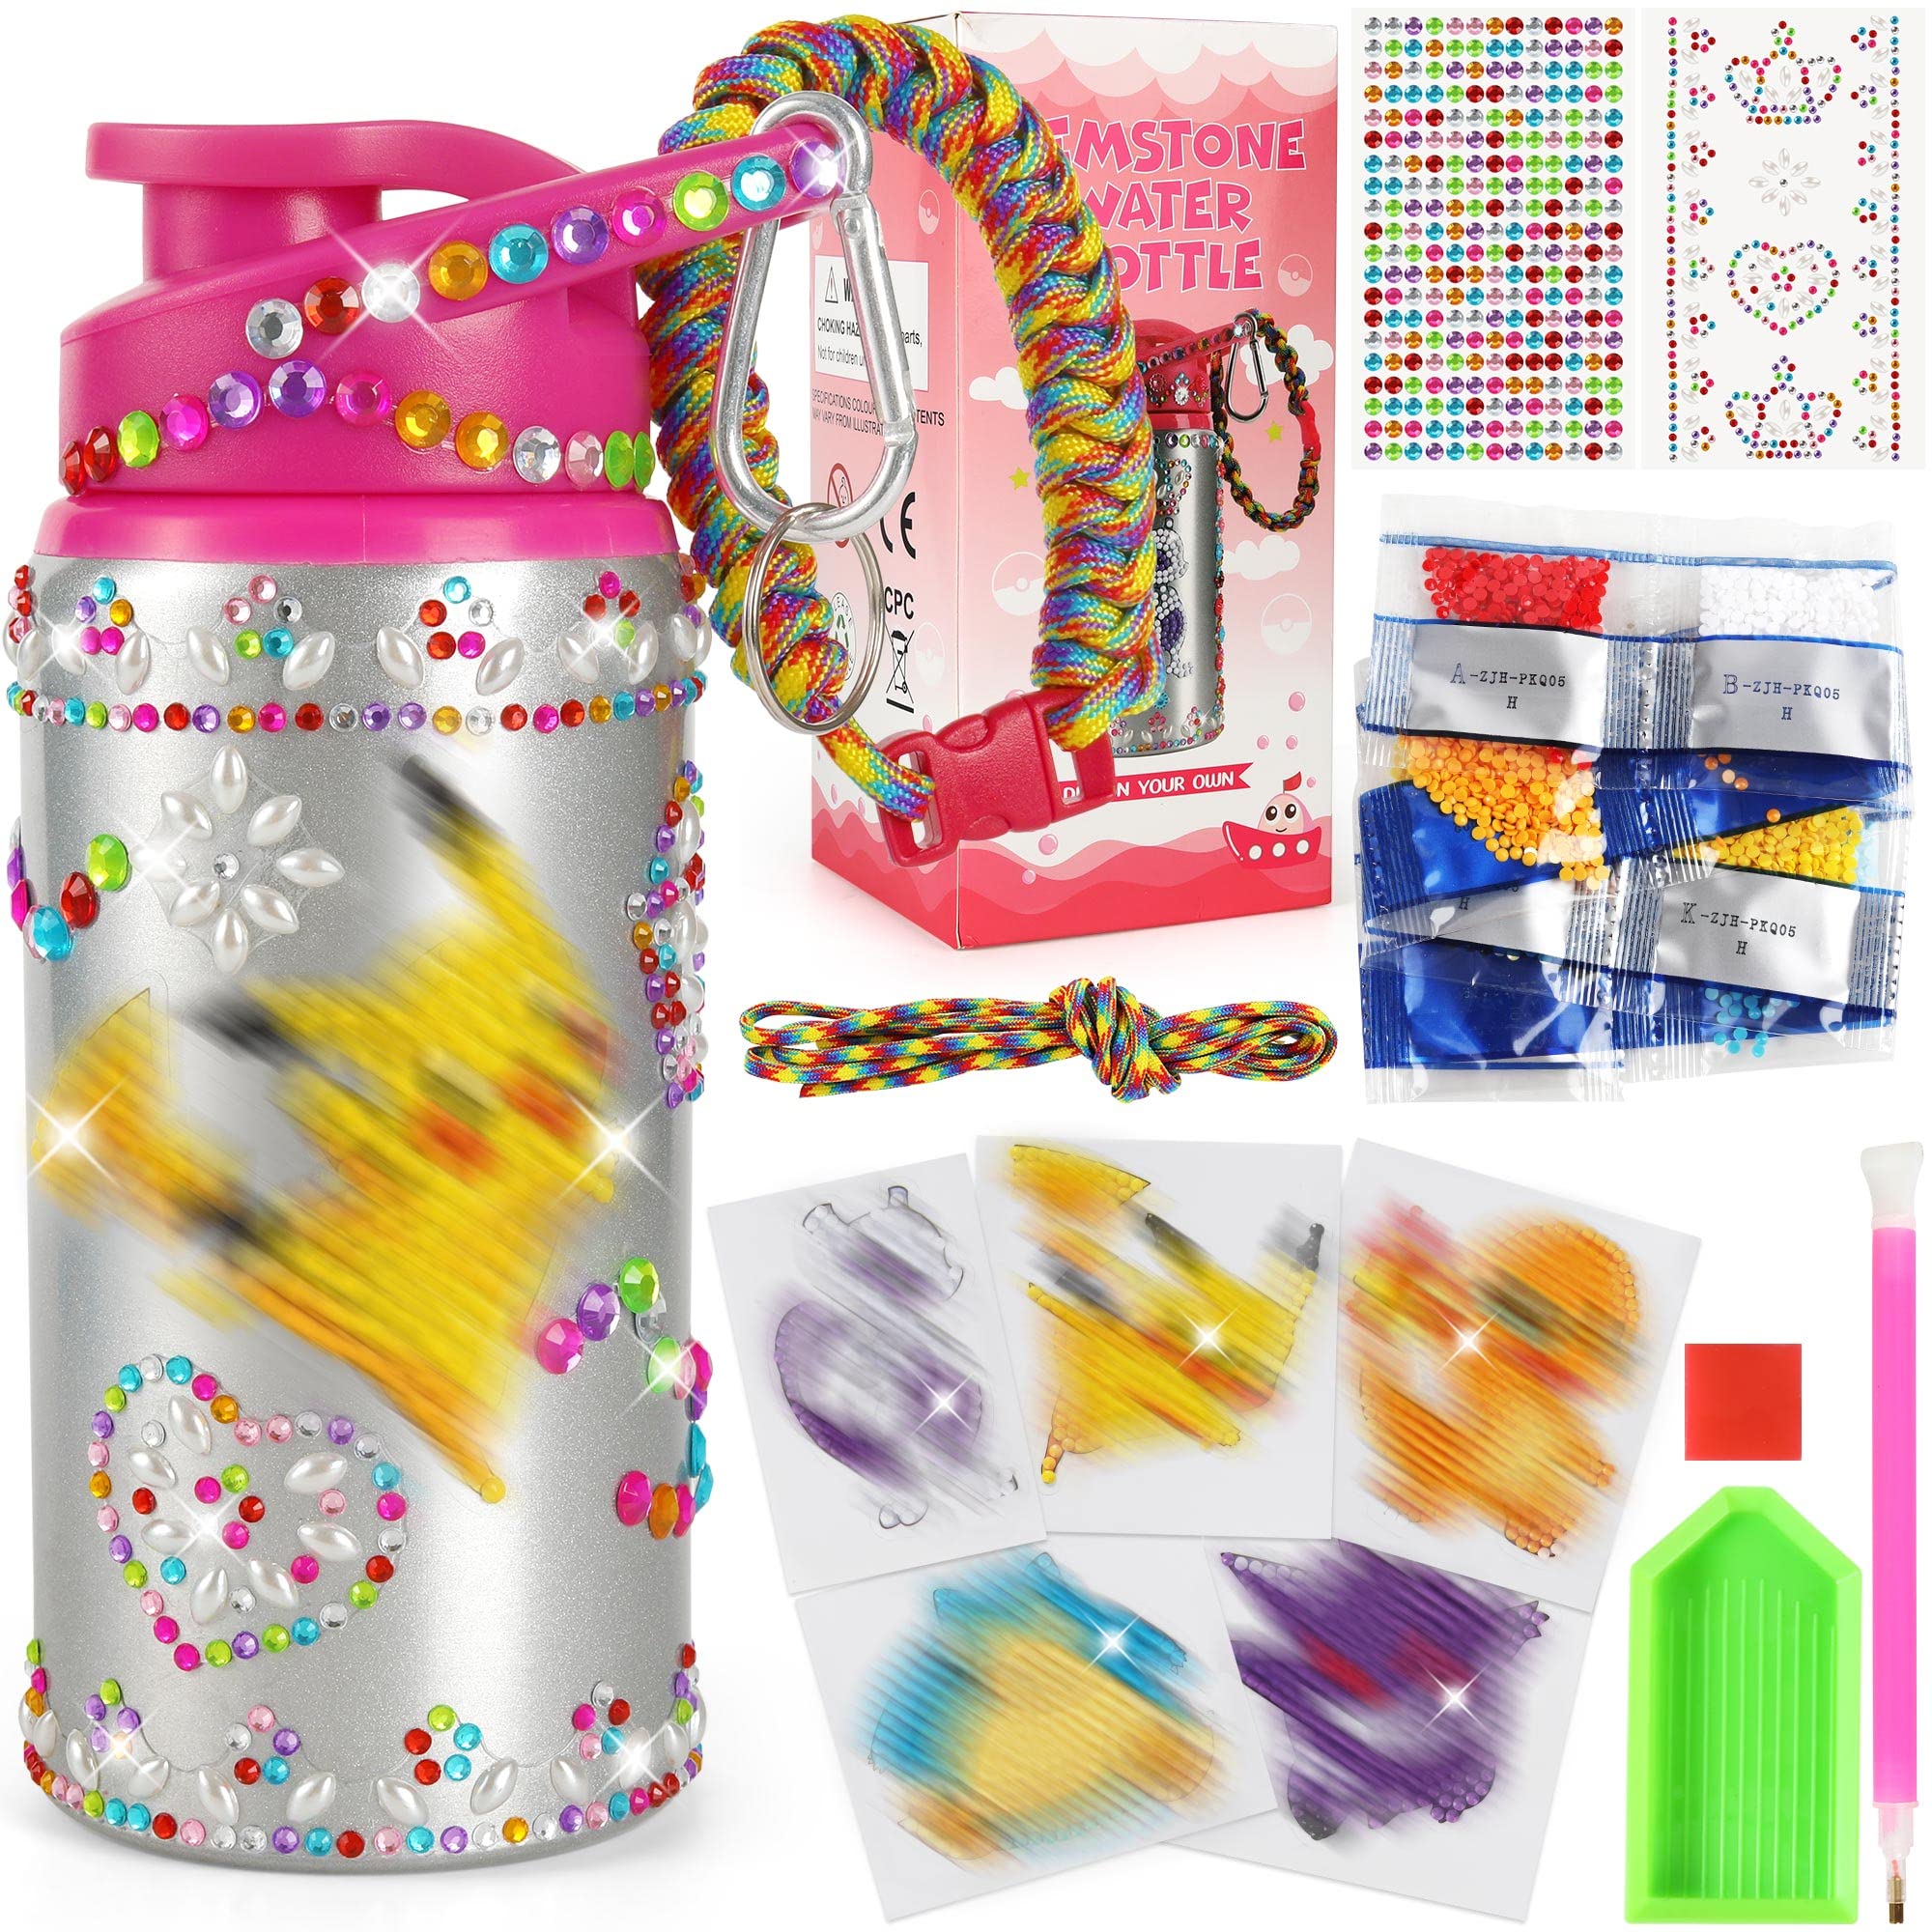 Decorate Your Own Water Bottle for Kids Girls Fun DIY Gem Diamond Painting  Kits Crafts Arts Gifts for Girls Birthday